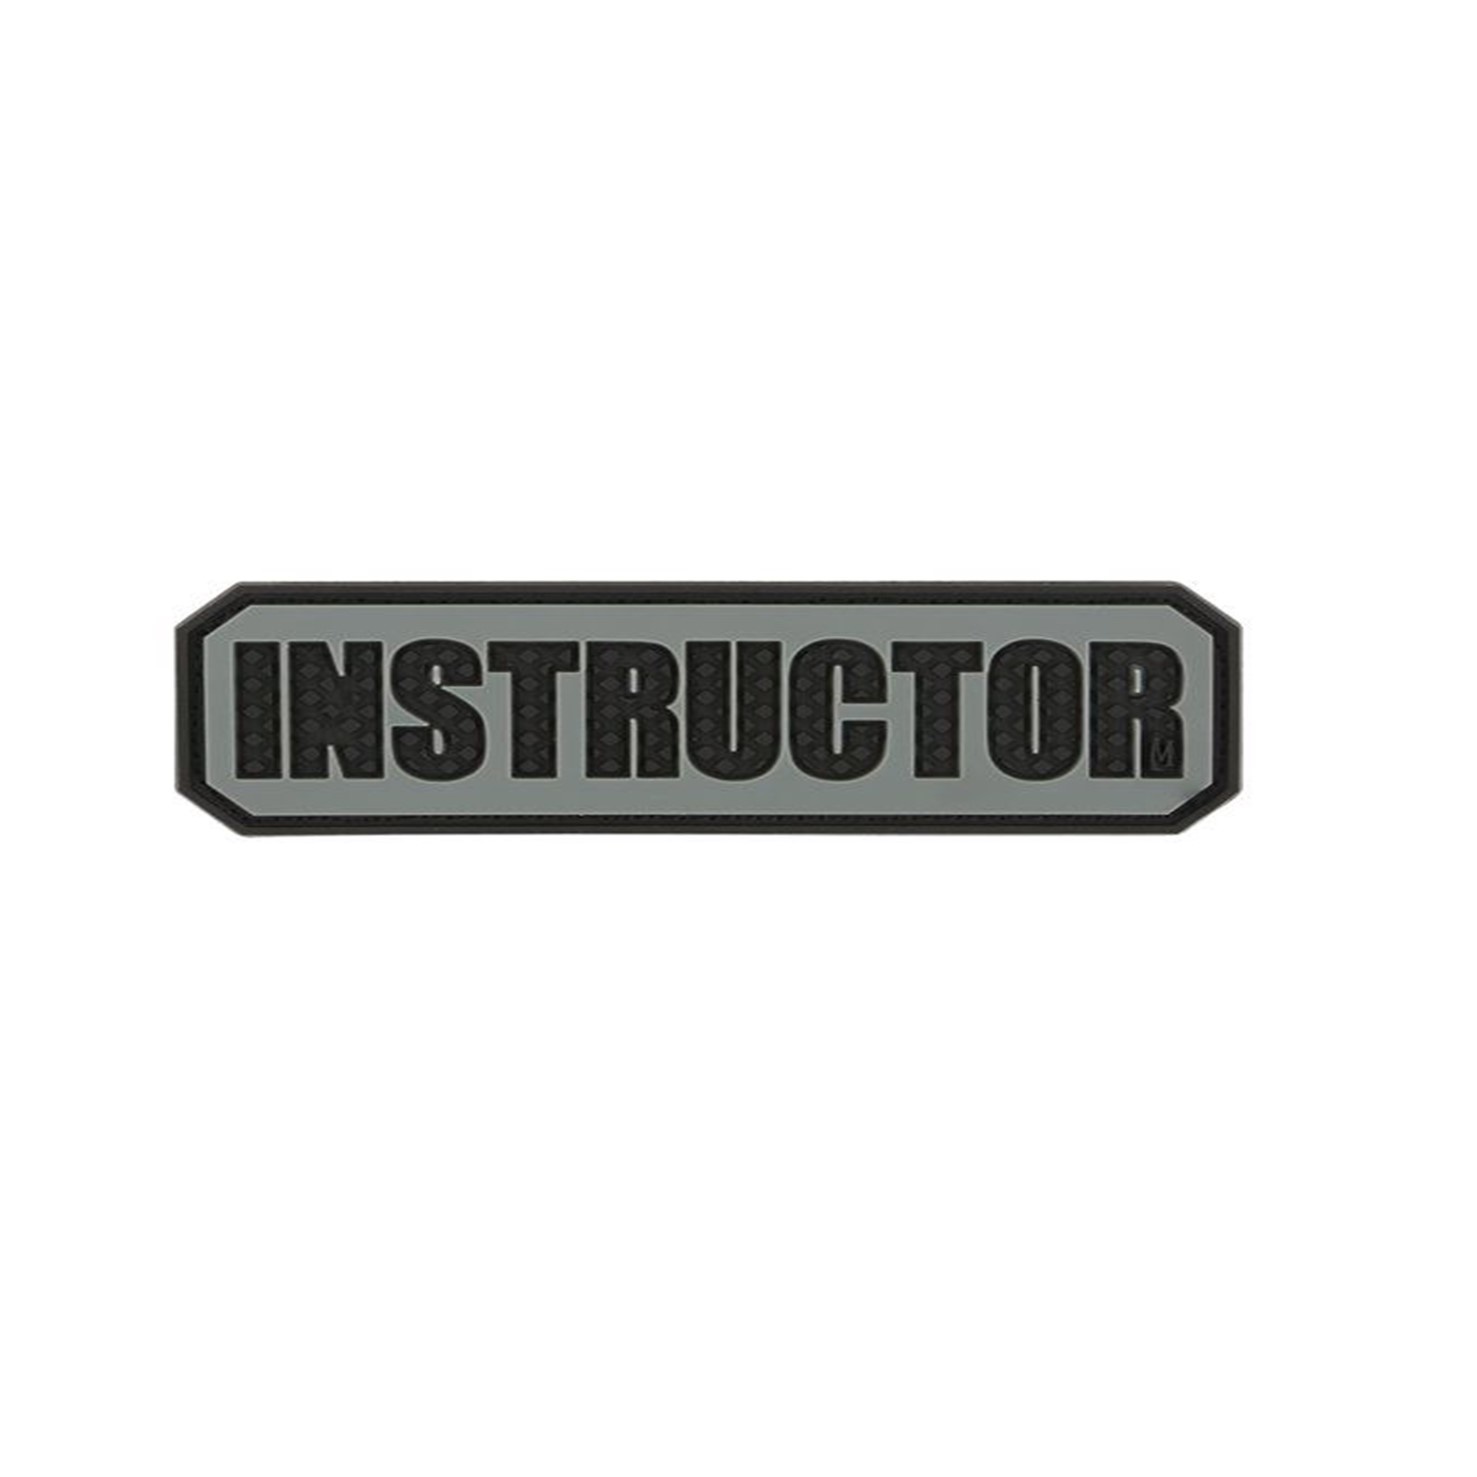 Maxpedition Instructor Morale Patch